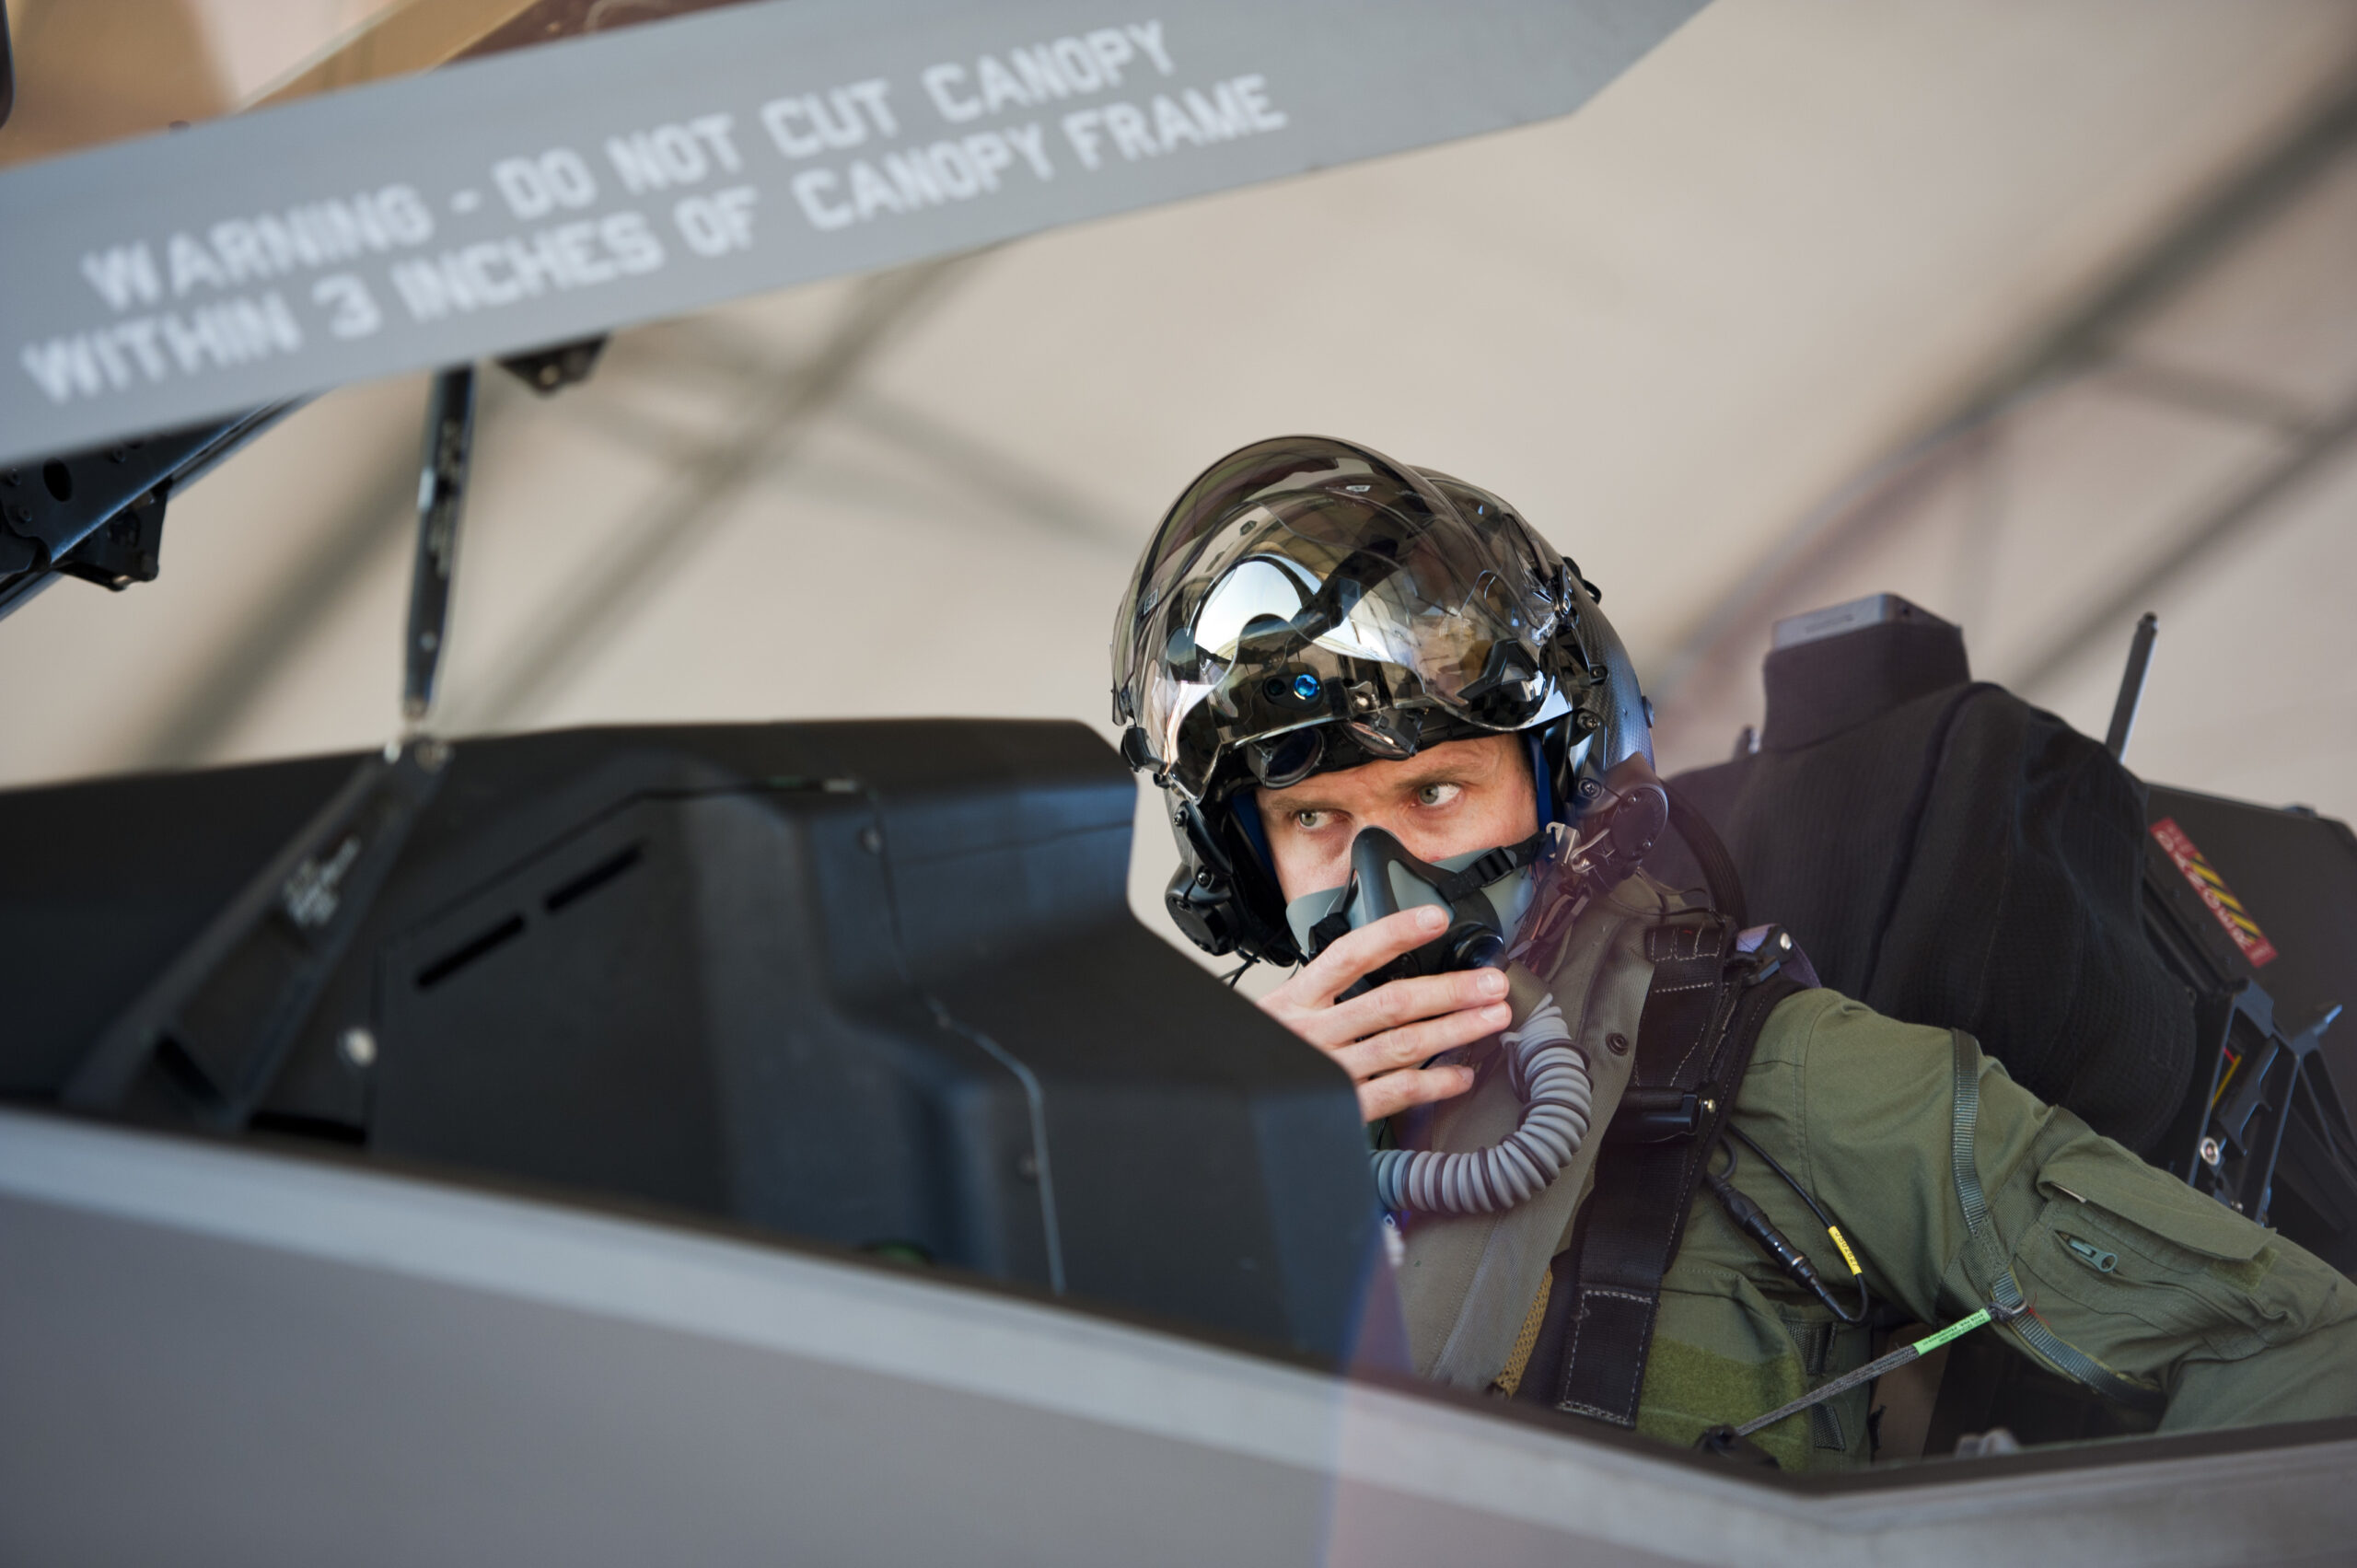 Royal Australian Air Force Squadron Leader Andrew Jackson, F-35 Lightning II student pilot, prepares to take off on his final training mission from Eglin Air Force Base, Fla., April 23, 2015. Jackson made history as the first Australian pilot to fly in the F-35A. The fifth-generation aircraft will meet Australia’s future air combat and strike needs, providing a networked force-multiplier effect in terms of situational awareness and combat effectiveness. (U.S. Air Force photo/Staff Sgt. Marleah Robertson)